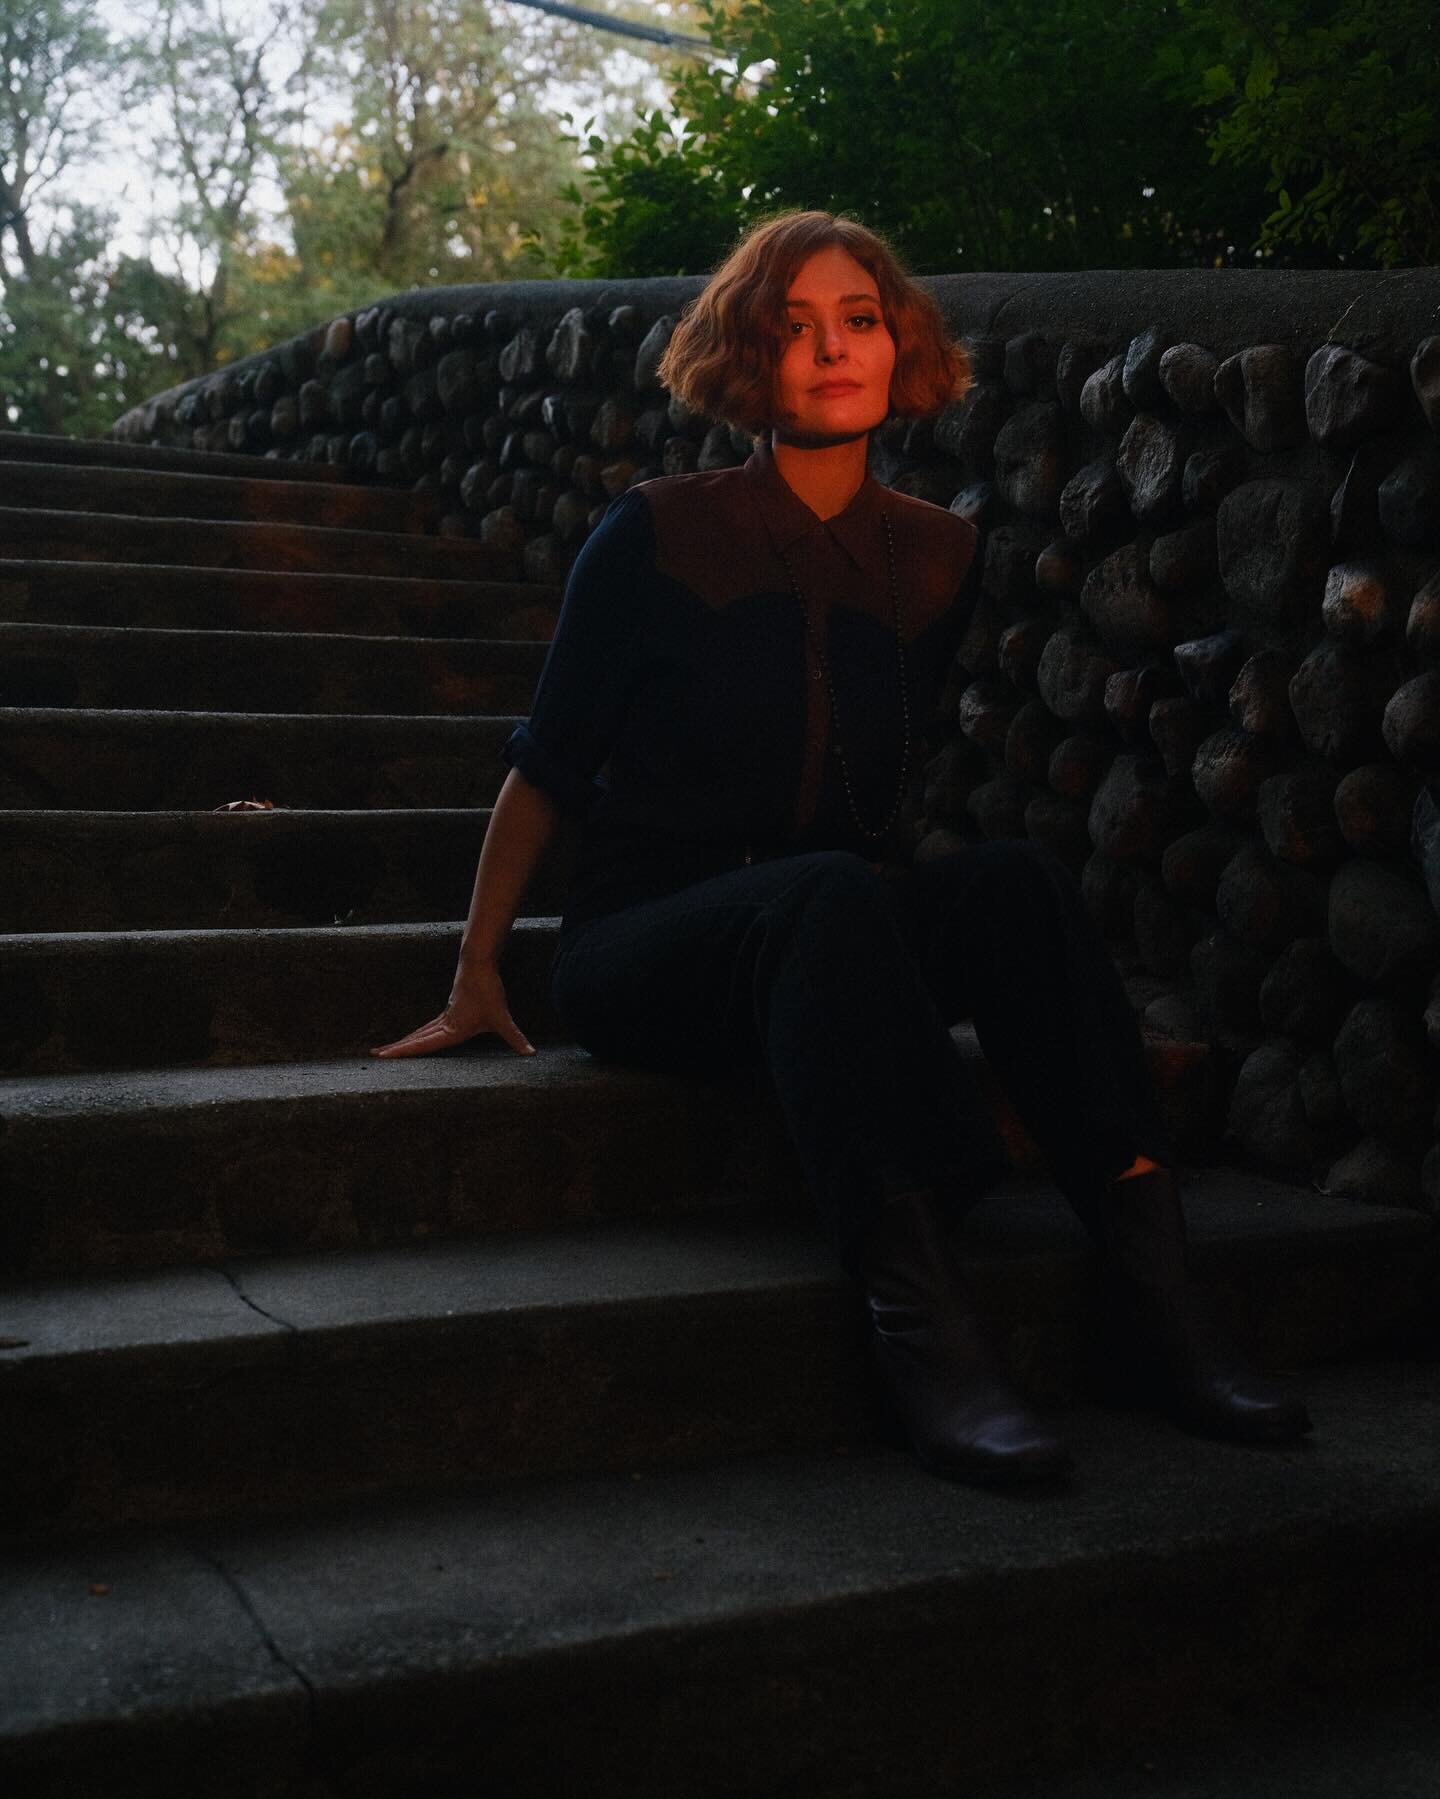 An evening in the park with singer-songwriter @libbydecamp.